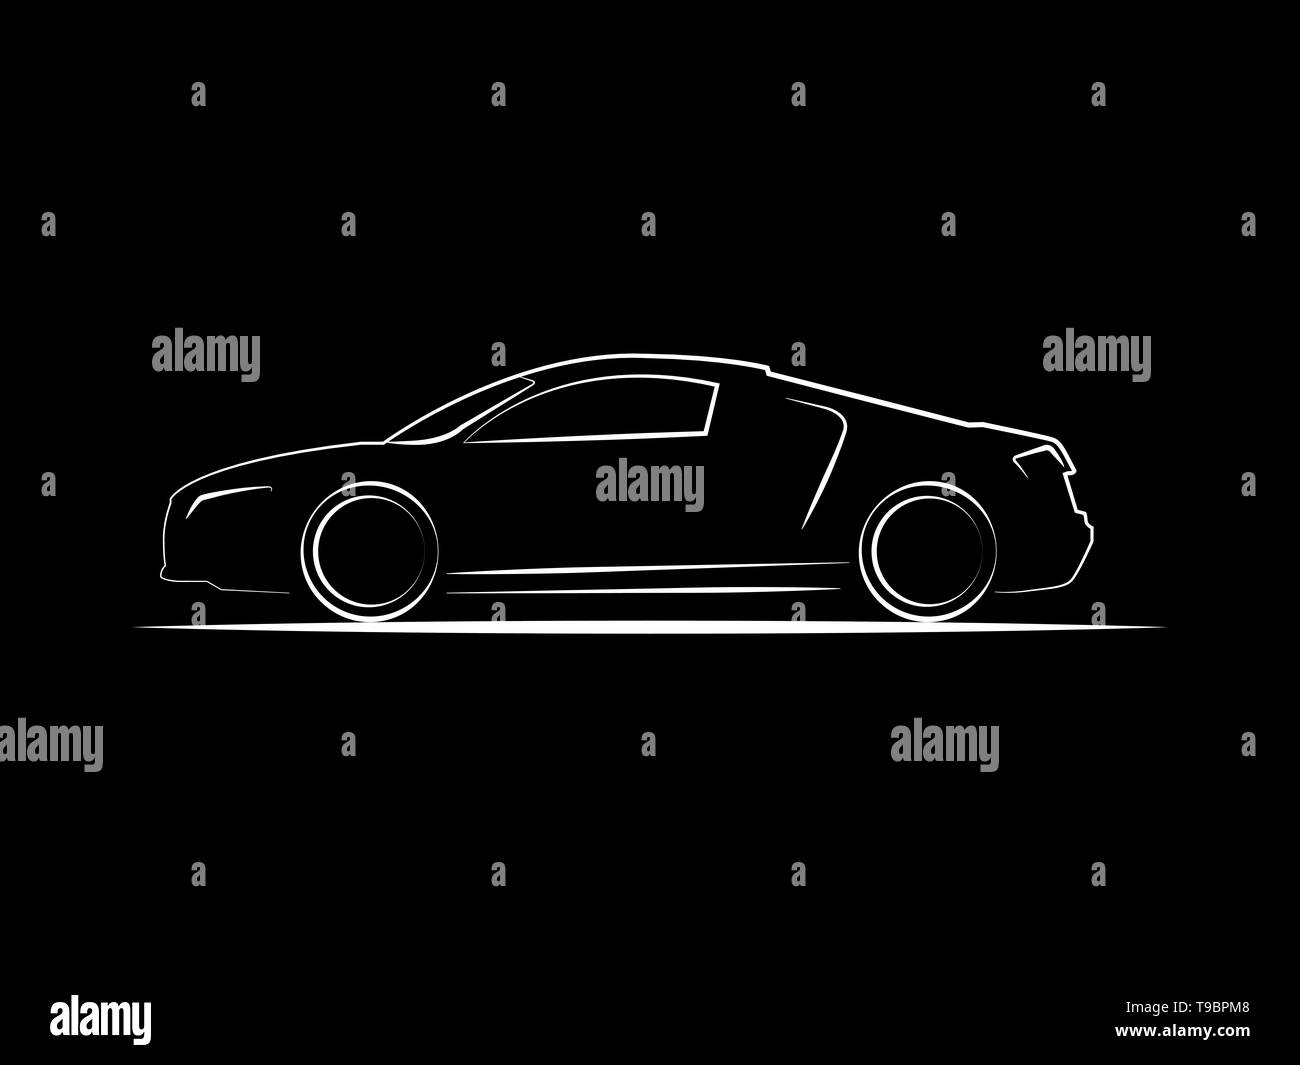 Race car in the dark side view line drawing illustration on black background  Stock Photo - Alamy